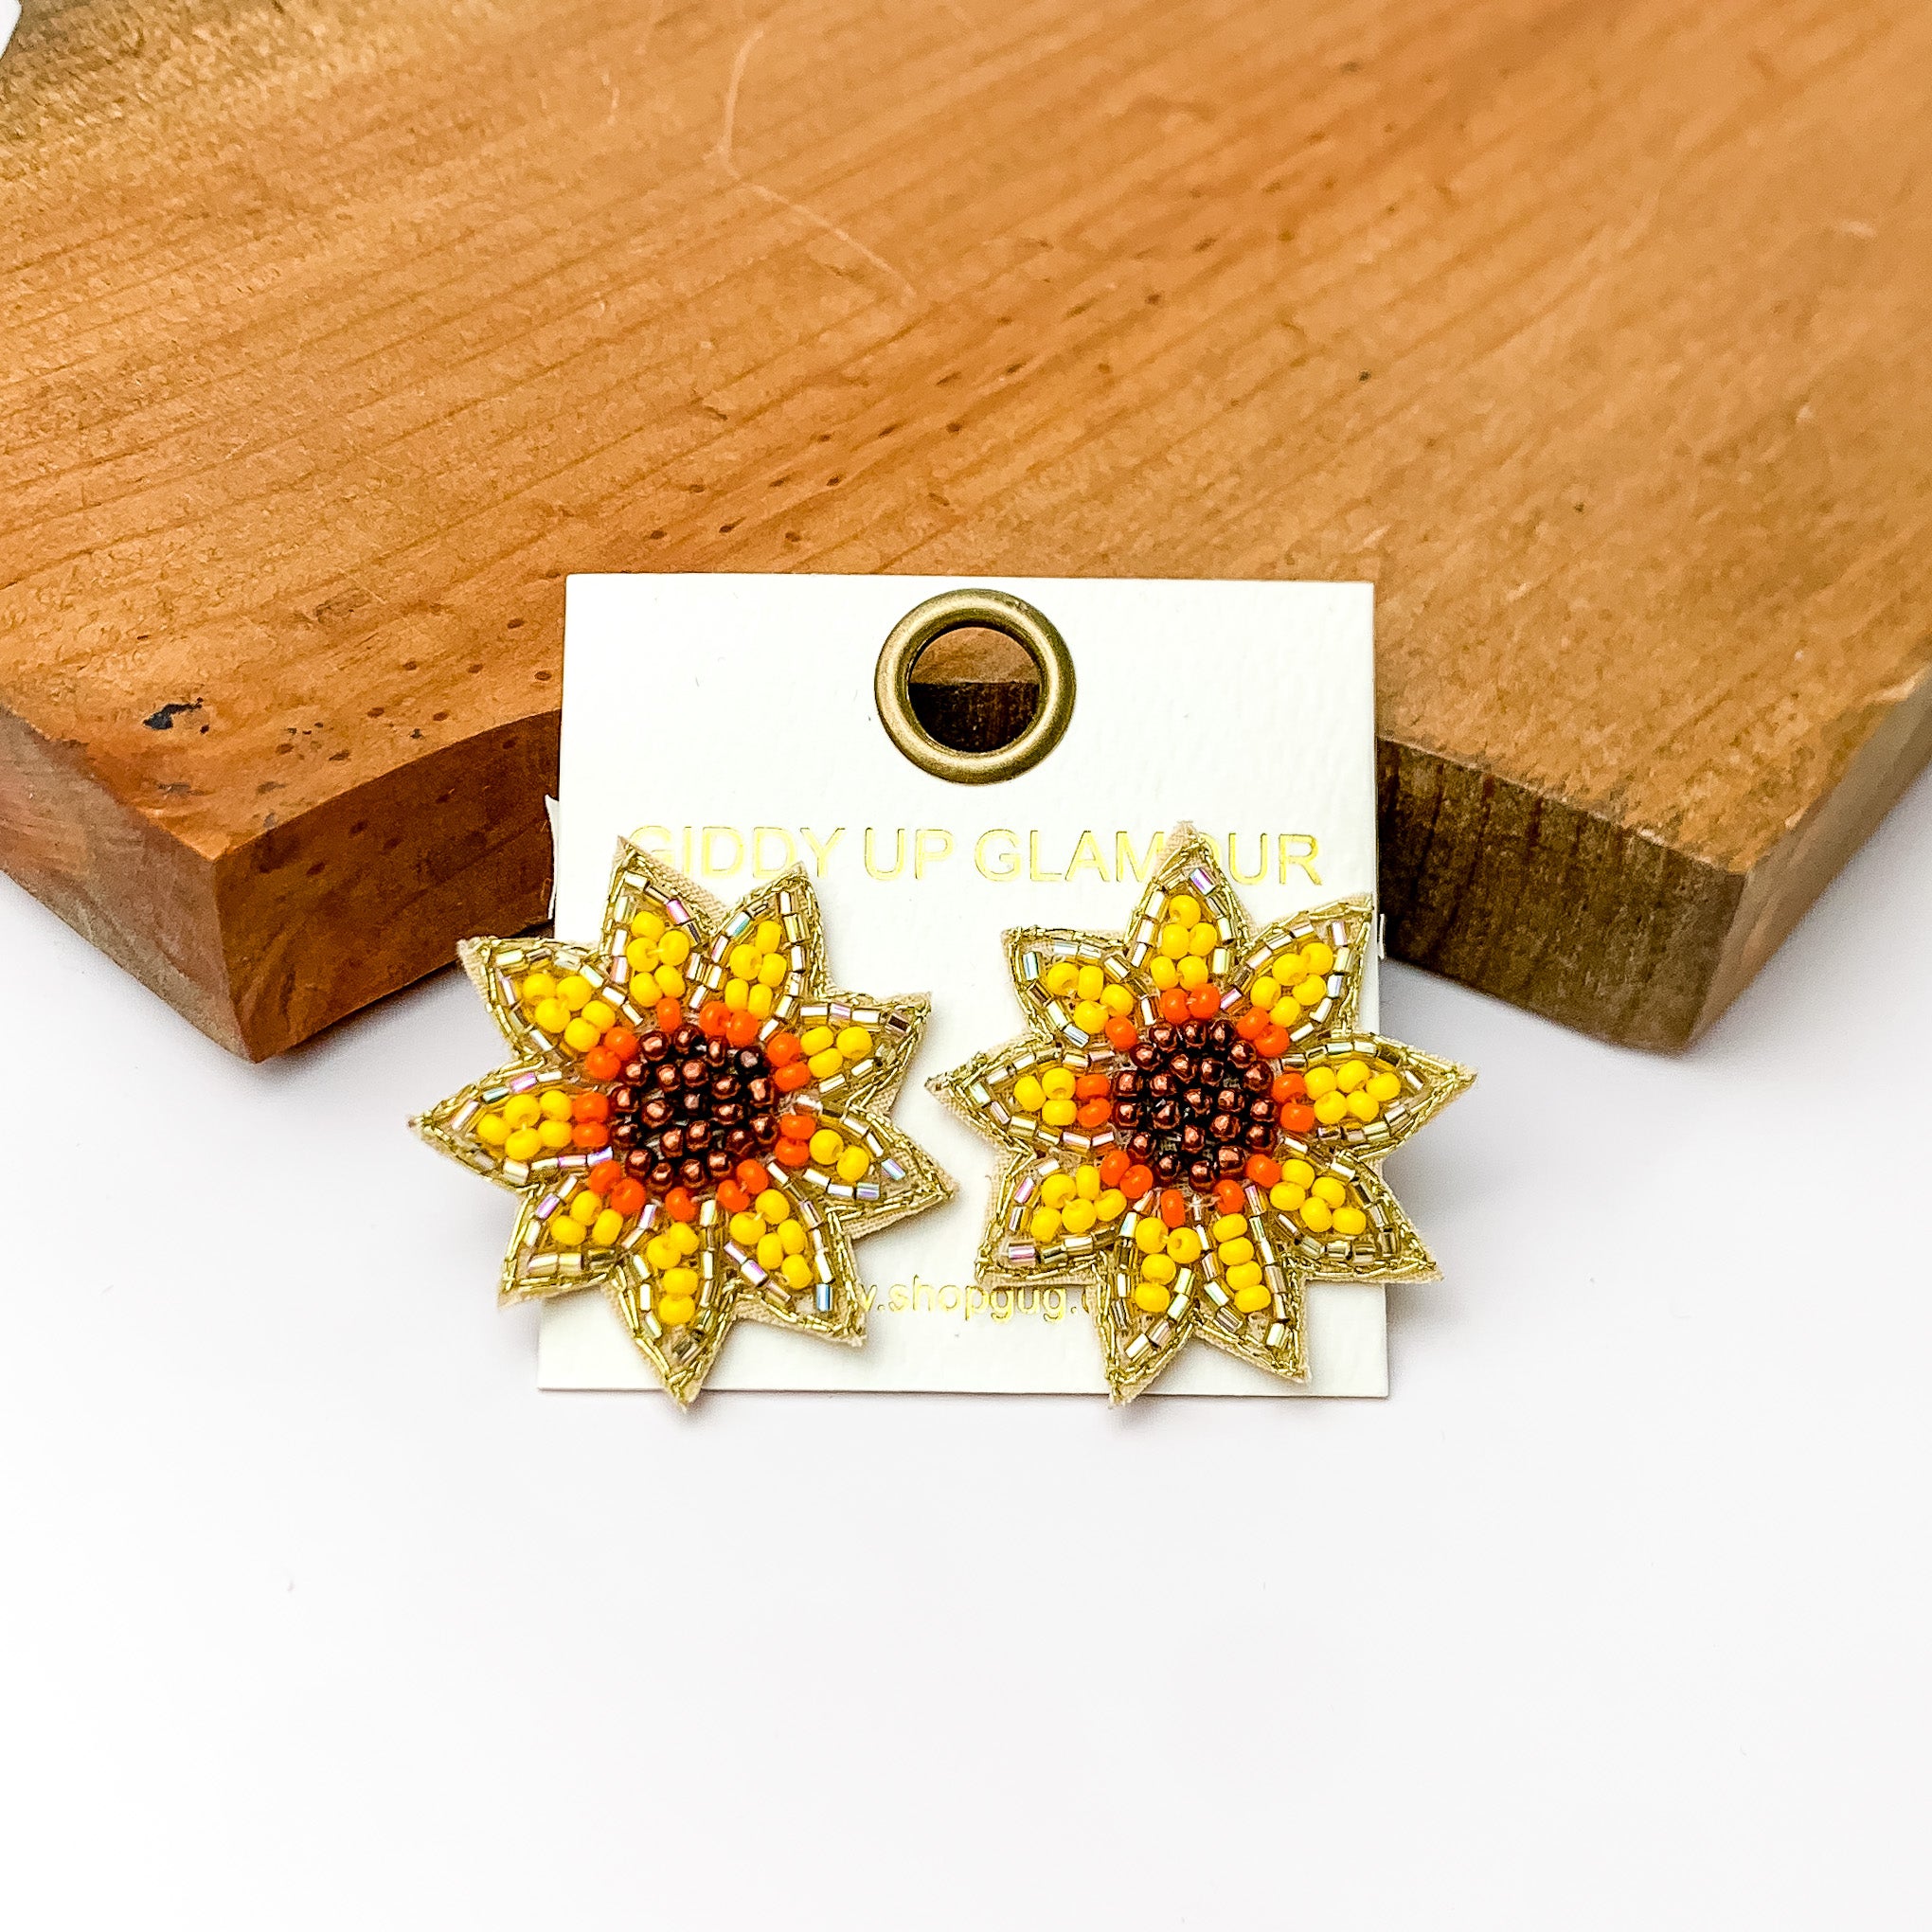 Beaded sunflower stud medium sized earrings.Pictured on a white background with a wood piece at the top.